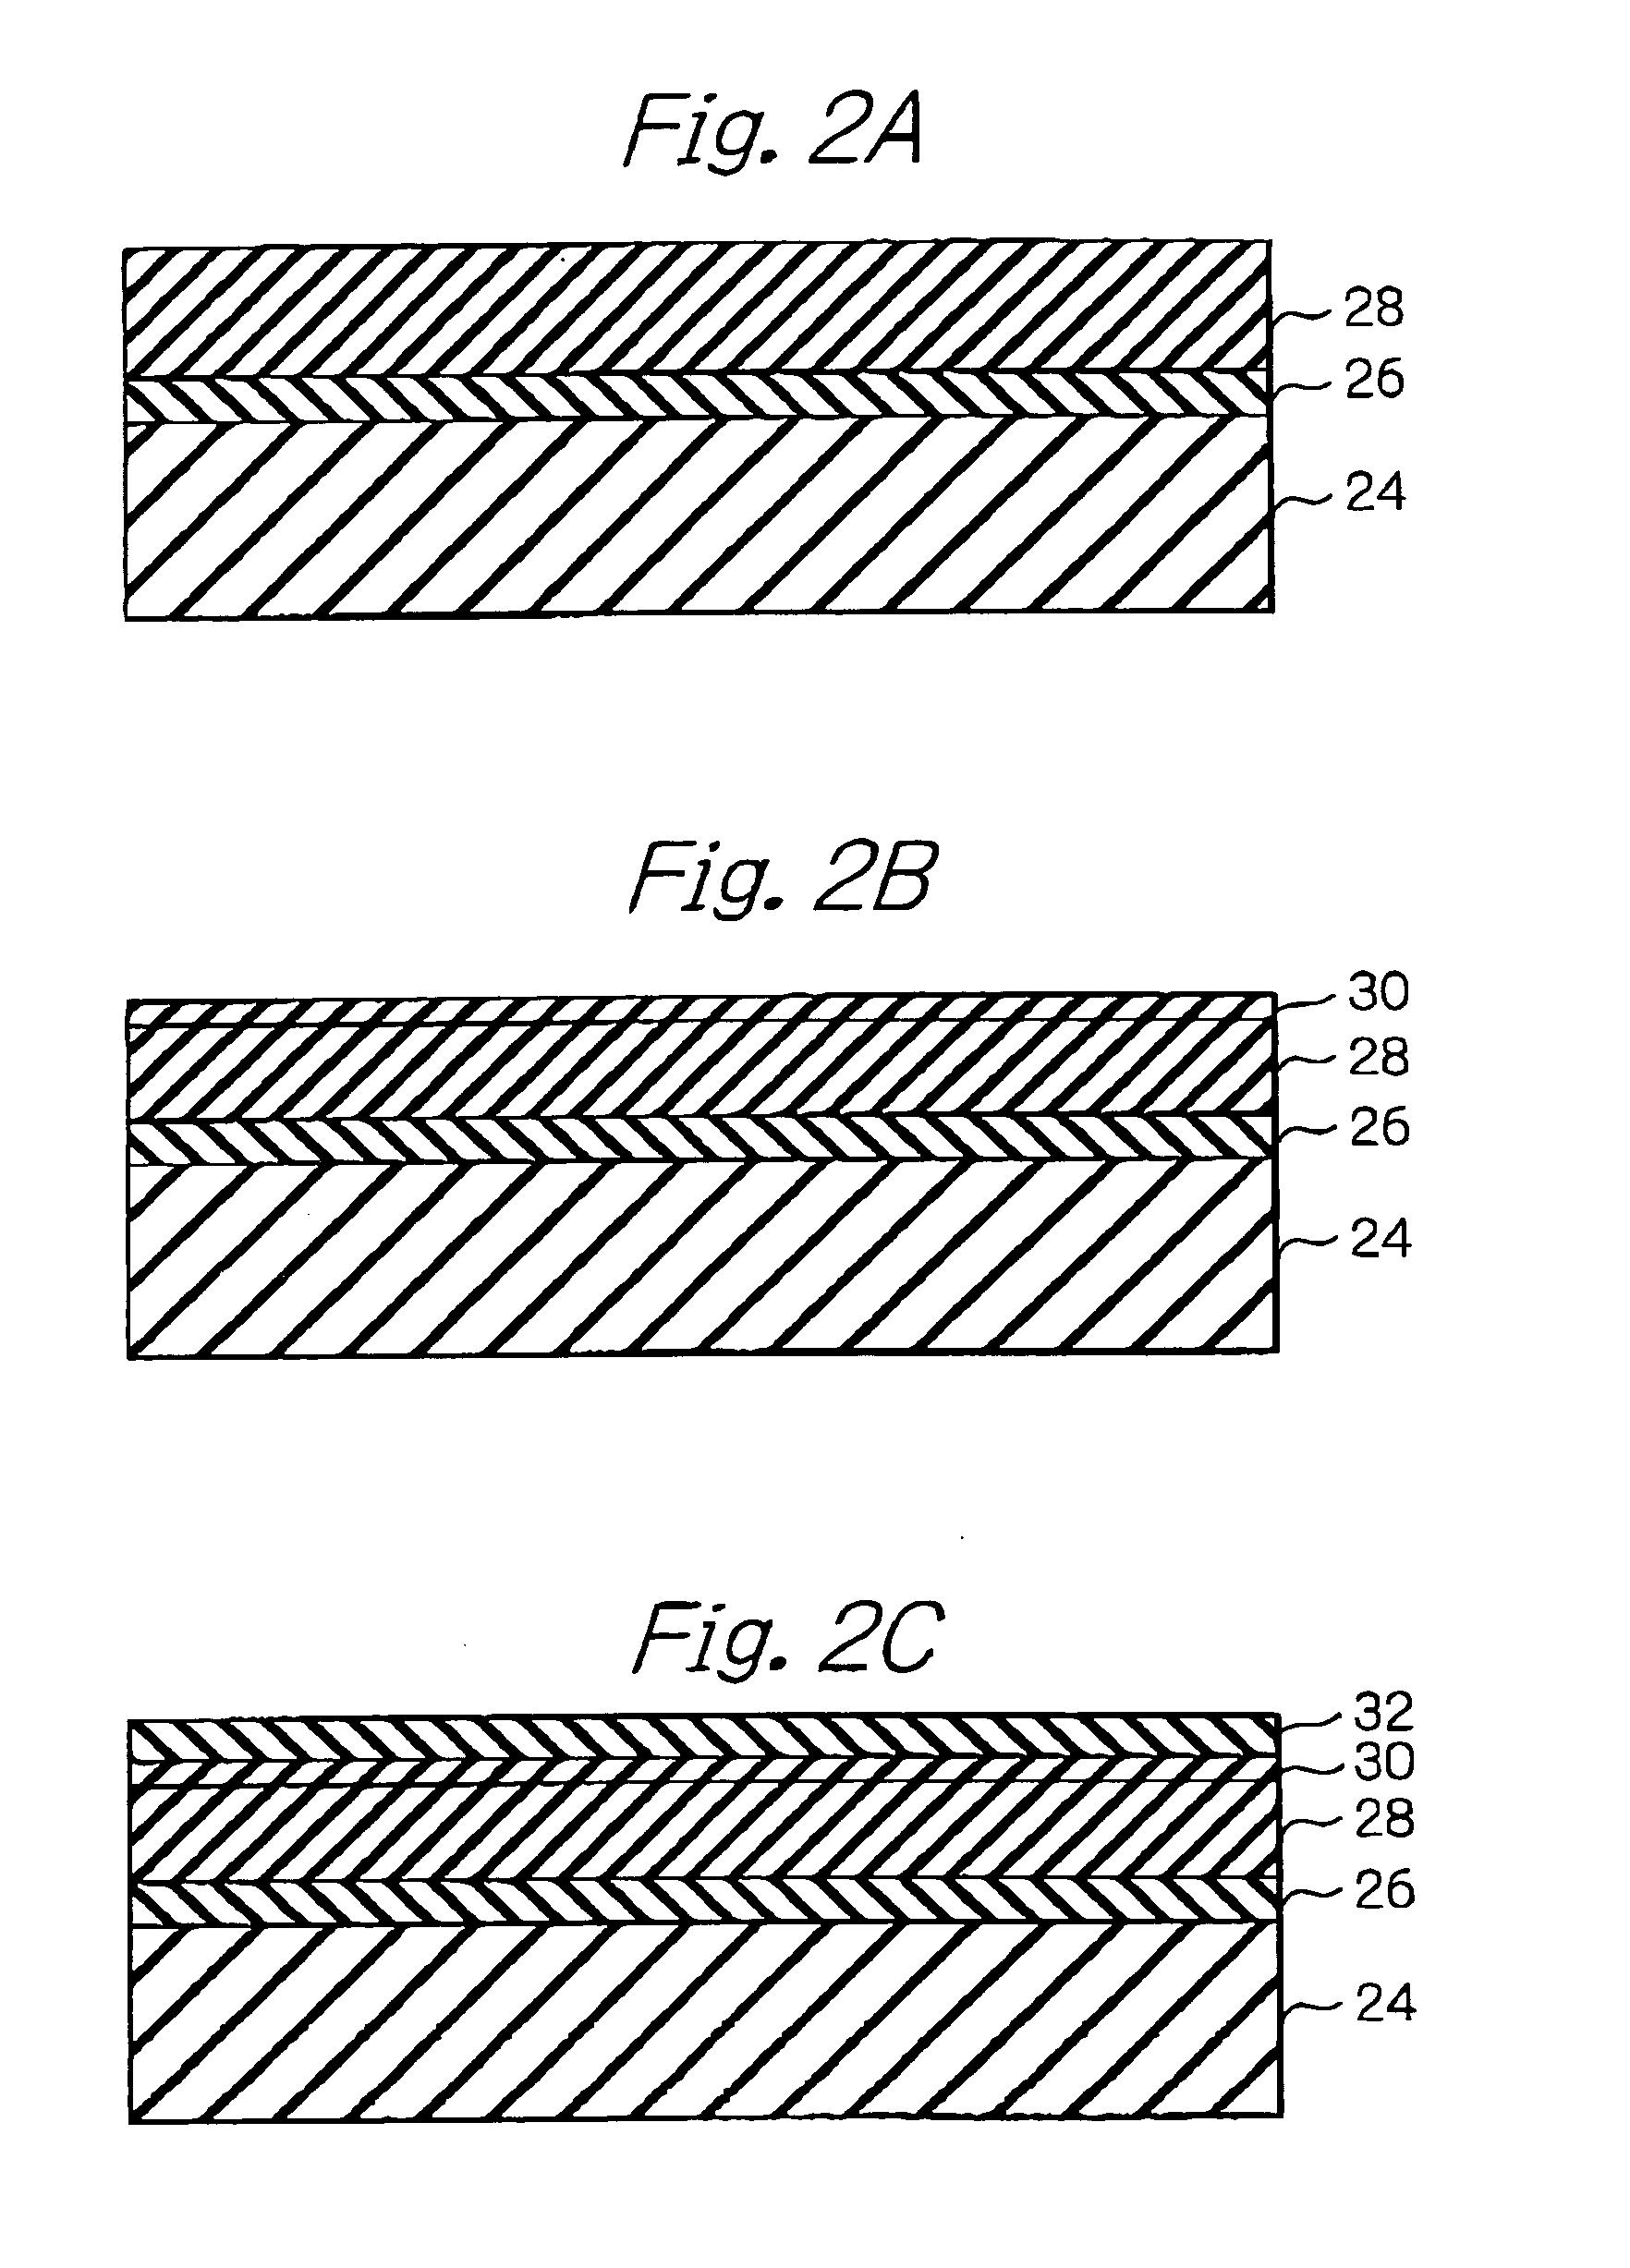 Semiconductor device, and production method for manufacturing such semiconductor device